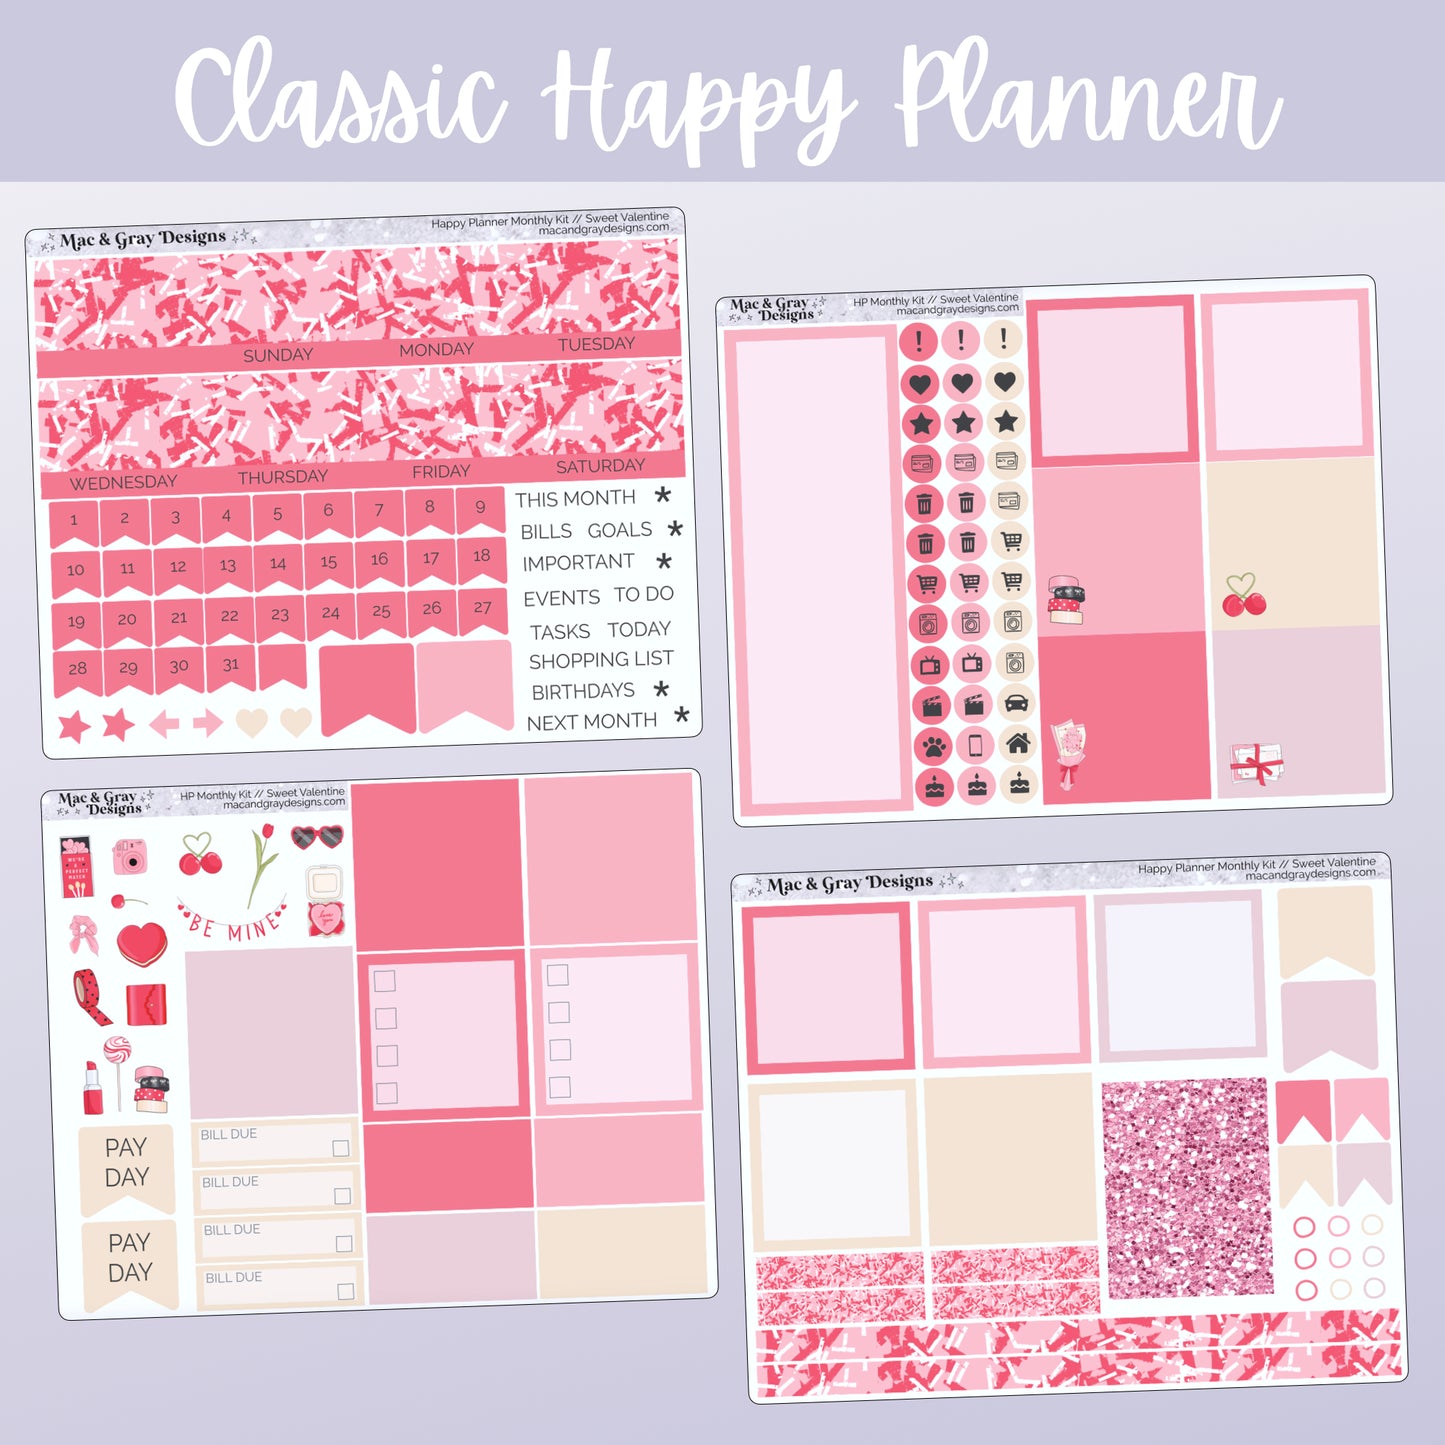 Sweet Valentine // Any Month Monthly Planner Stickers UK - Standard Vertical, Passion Planner and Happy Planner (Mini, Classic & Big)